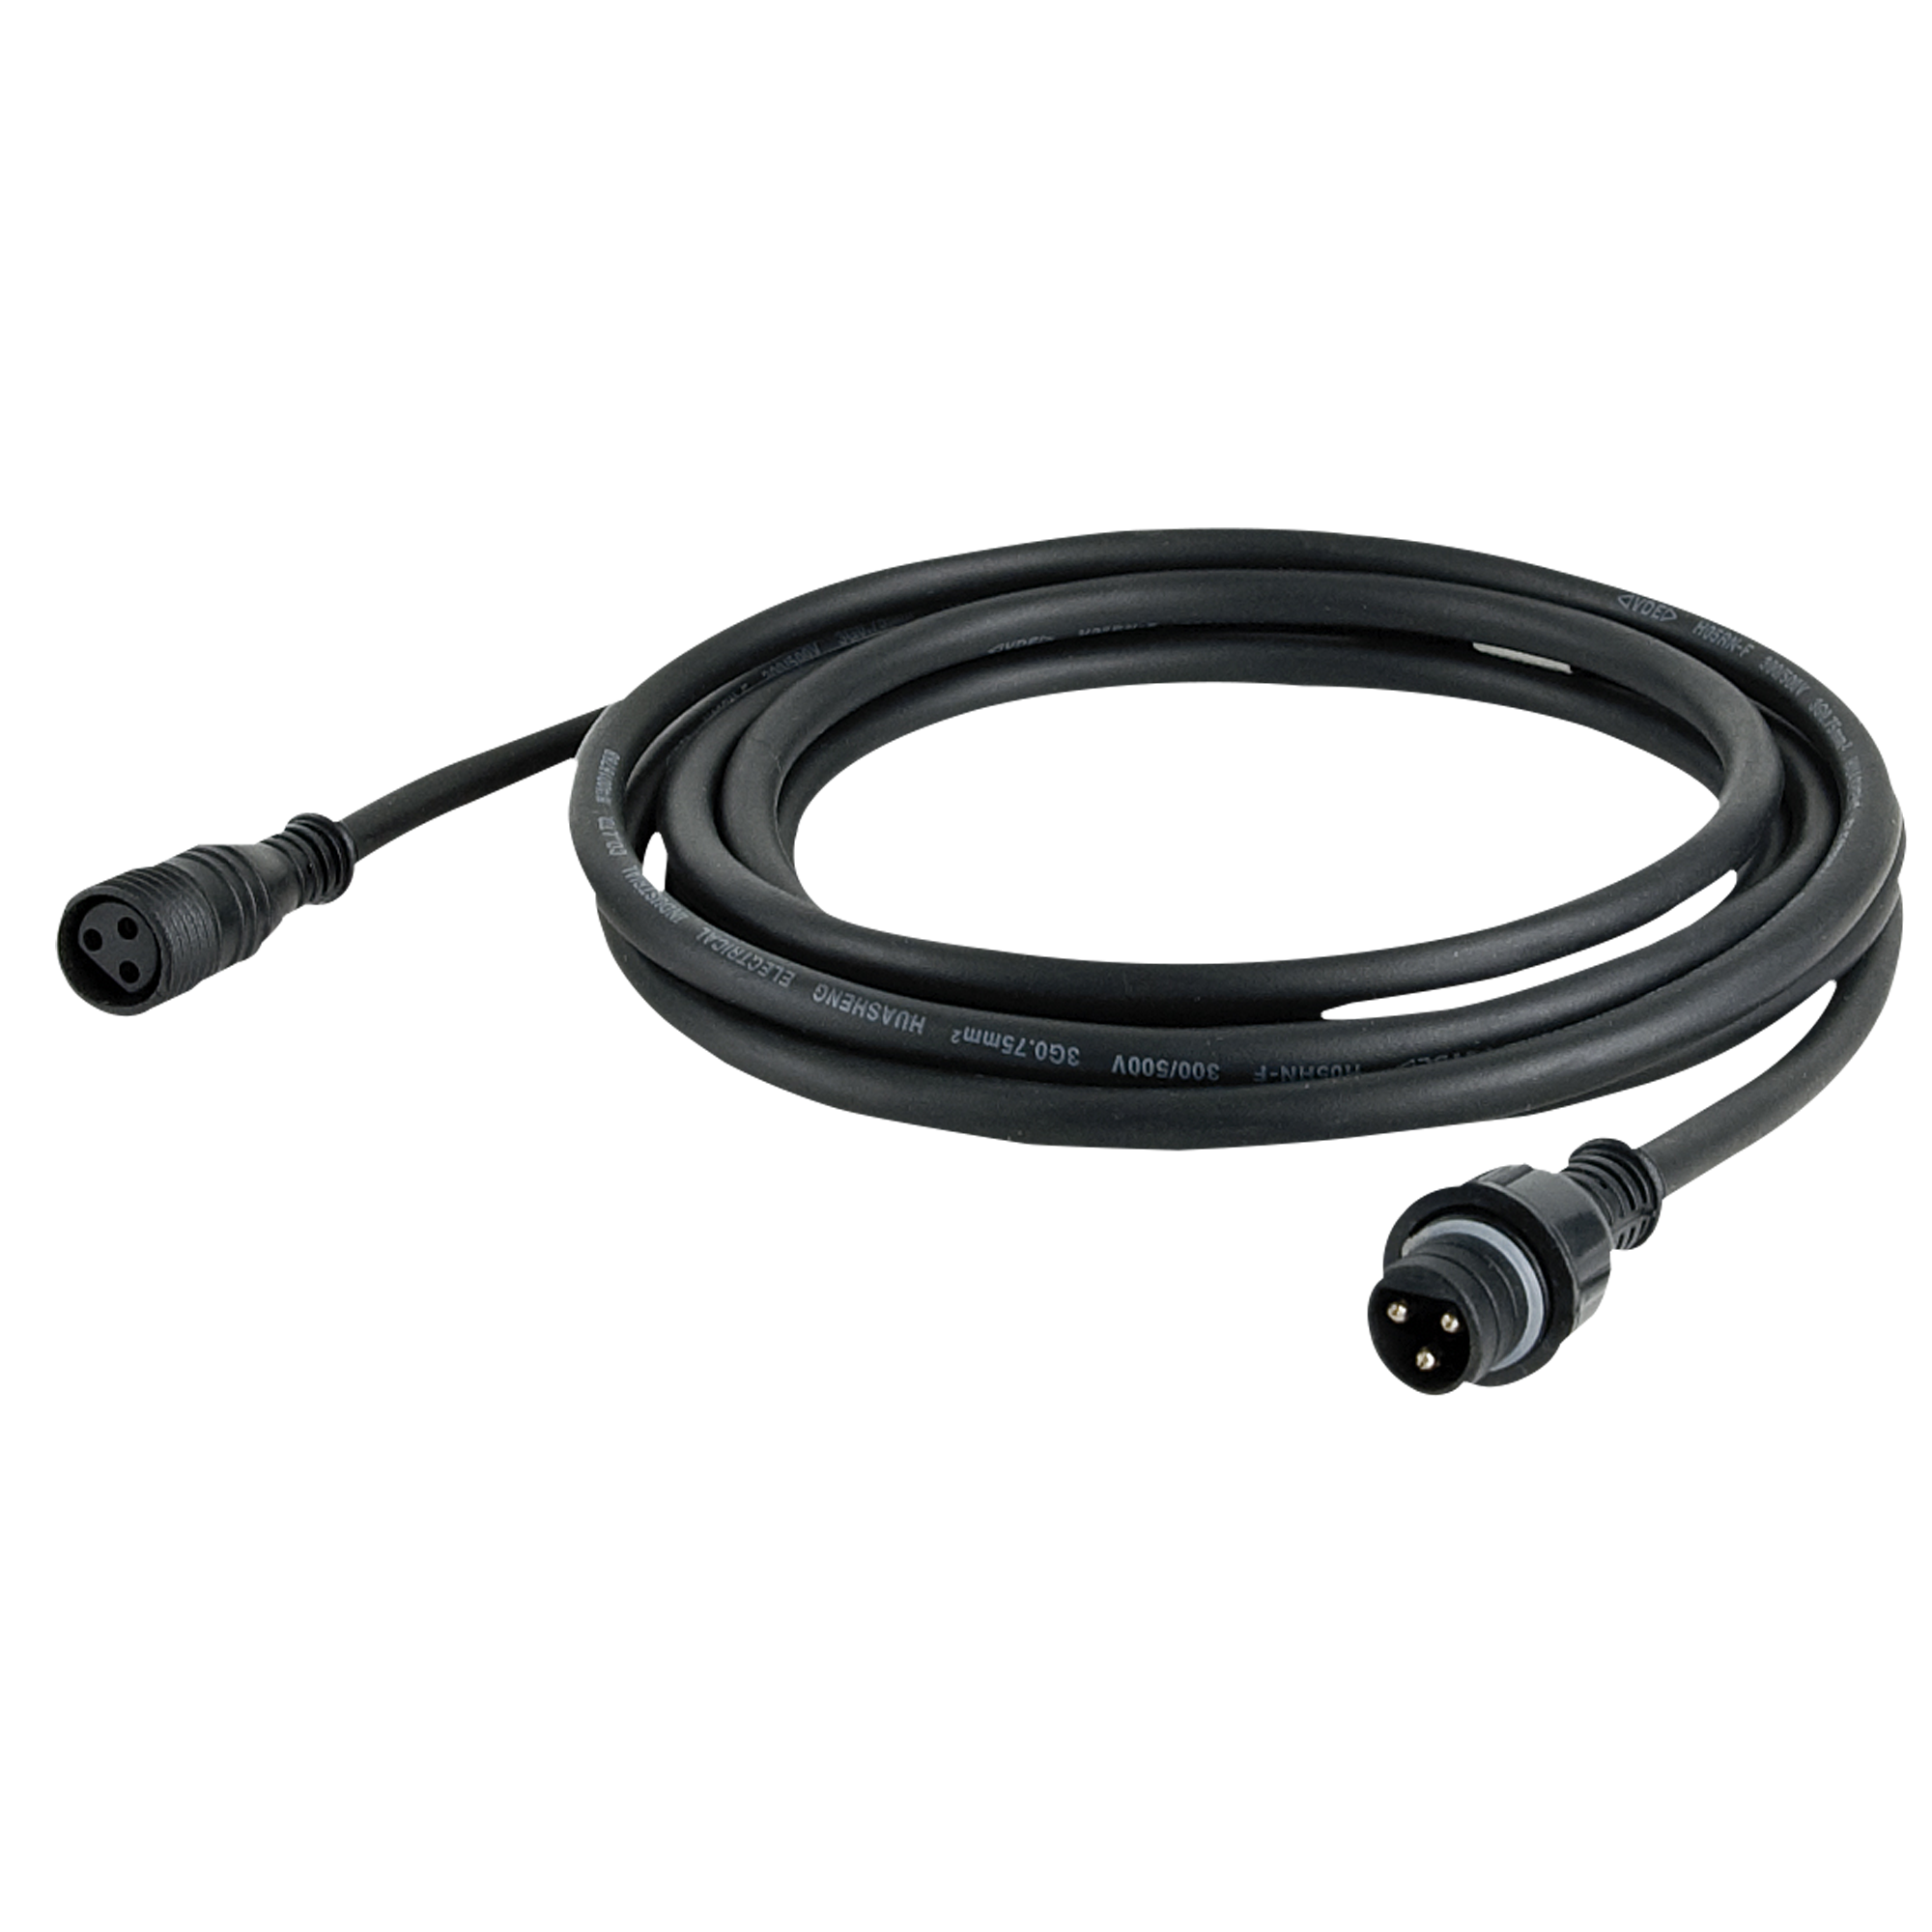 DMX Extension Cable for Cameleon Series - Onlinediscowinkel.nl